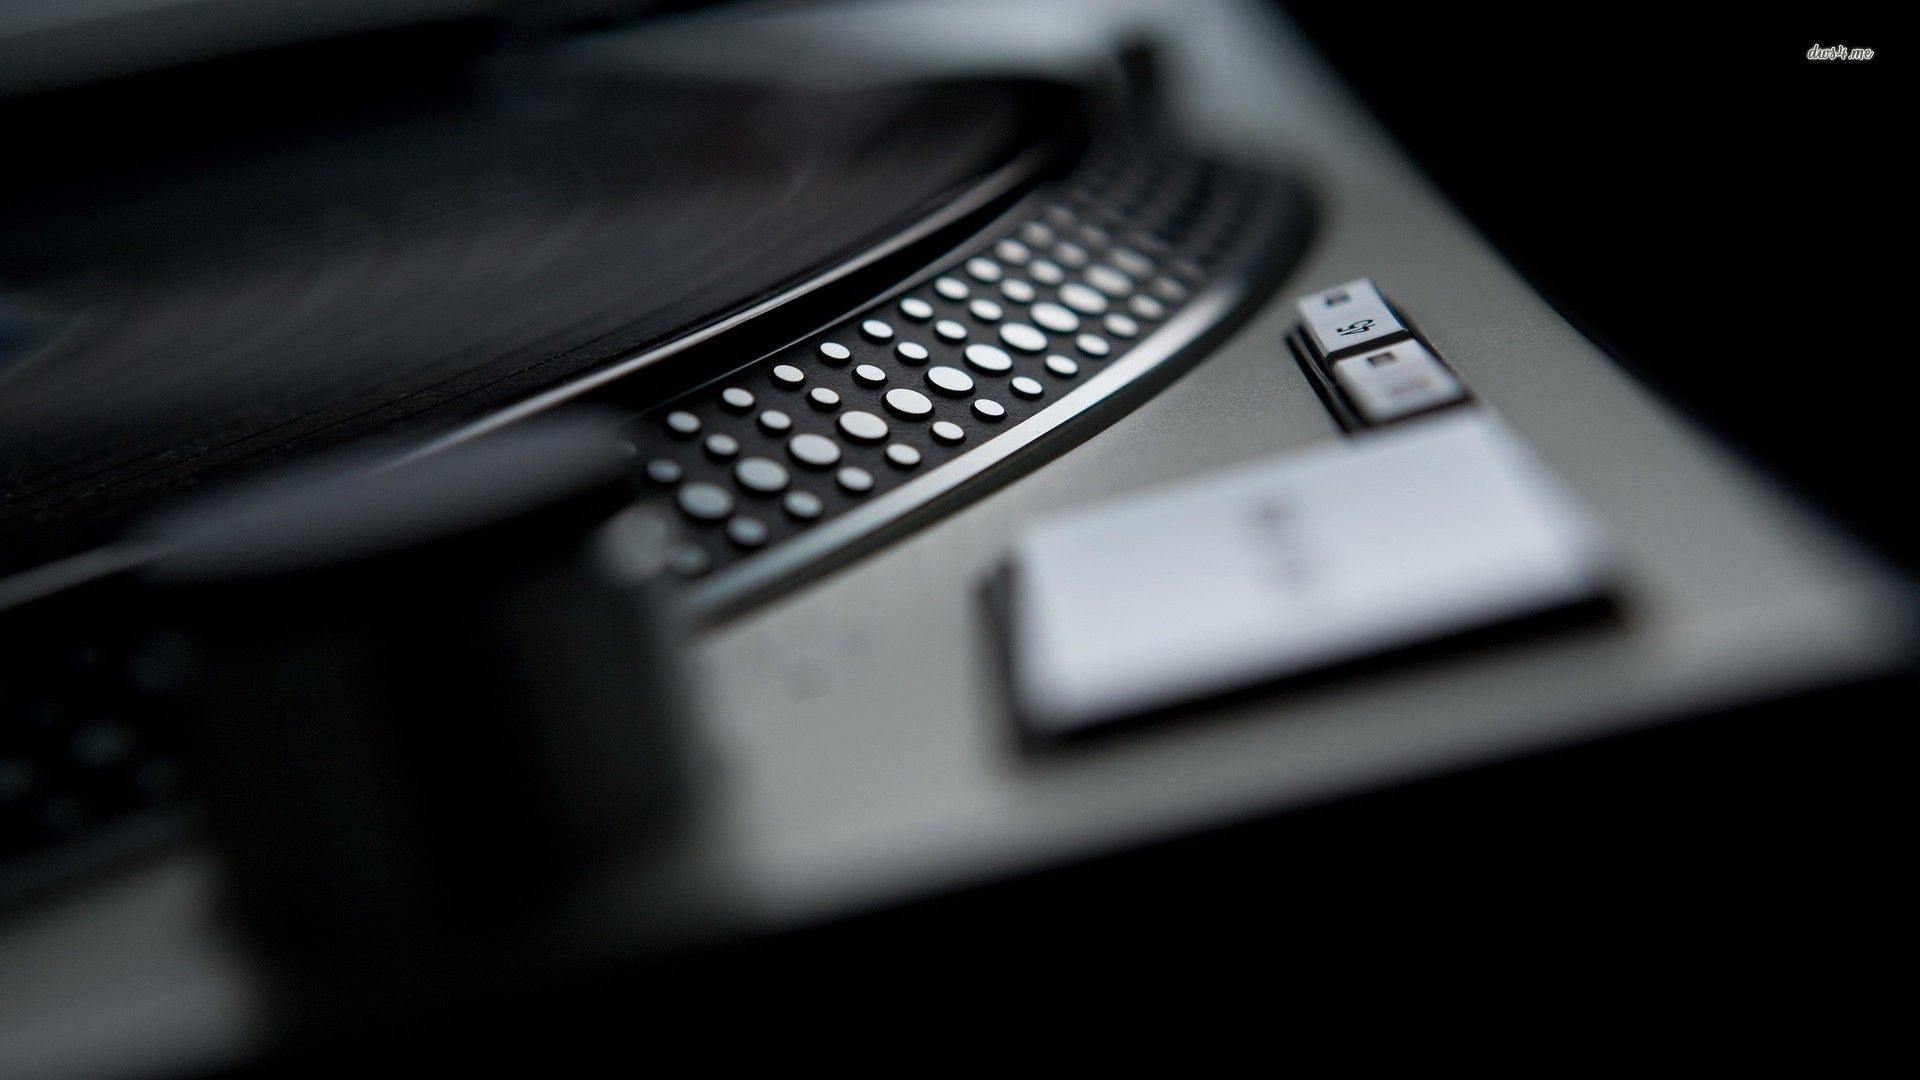 Turntable wallpaper - Music wallpapers - #15735